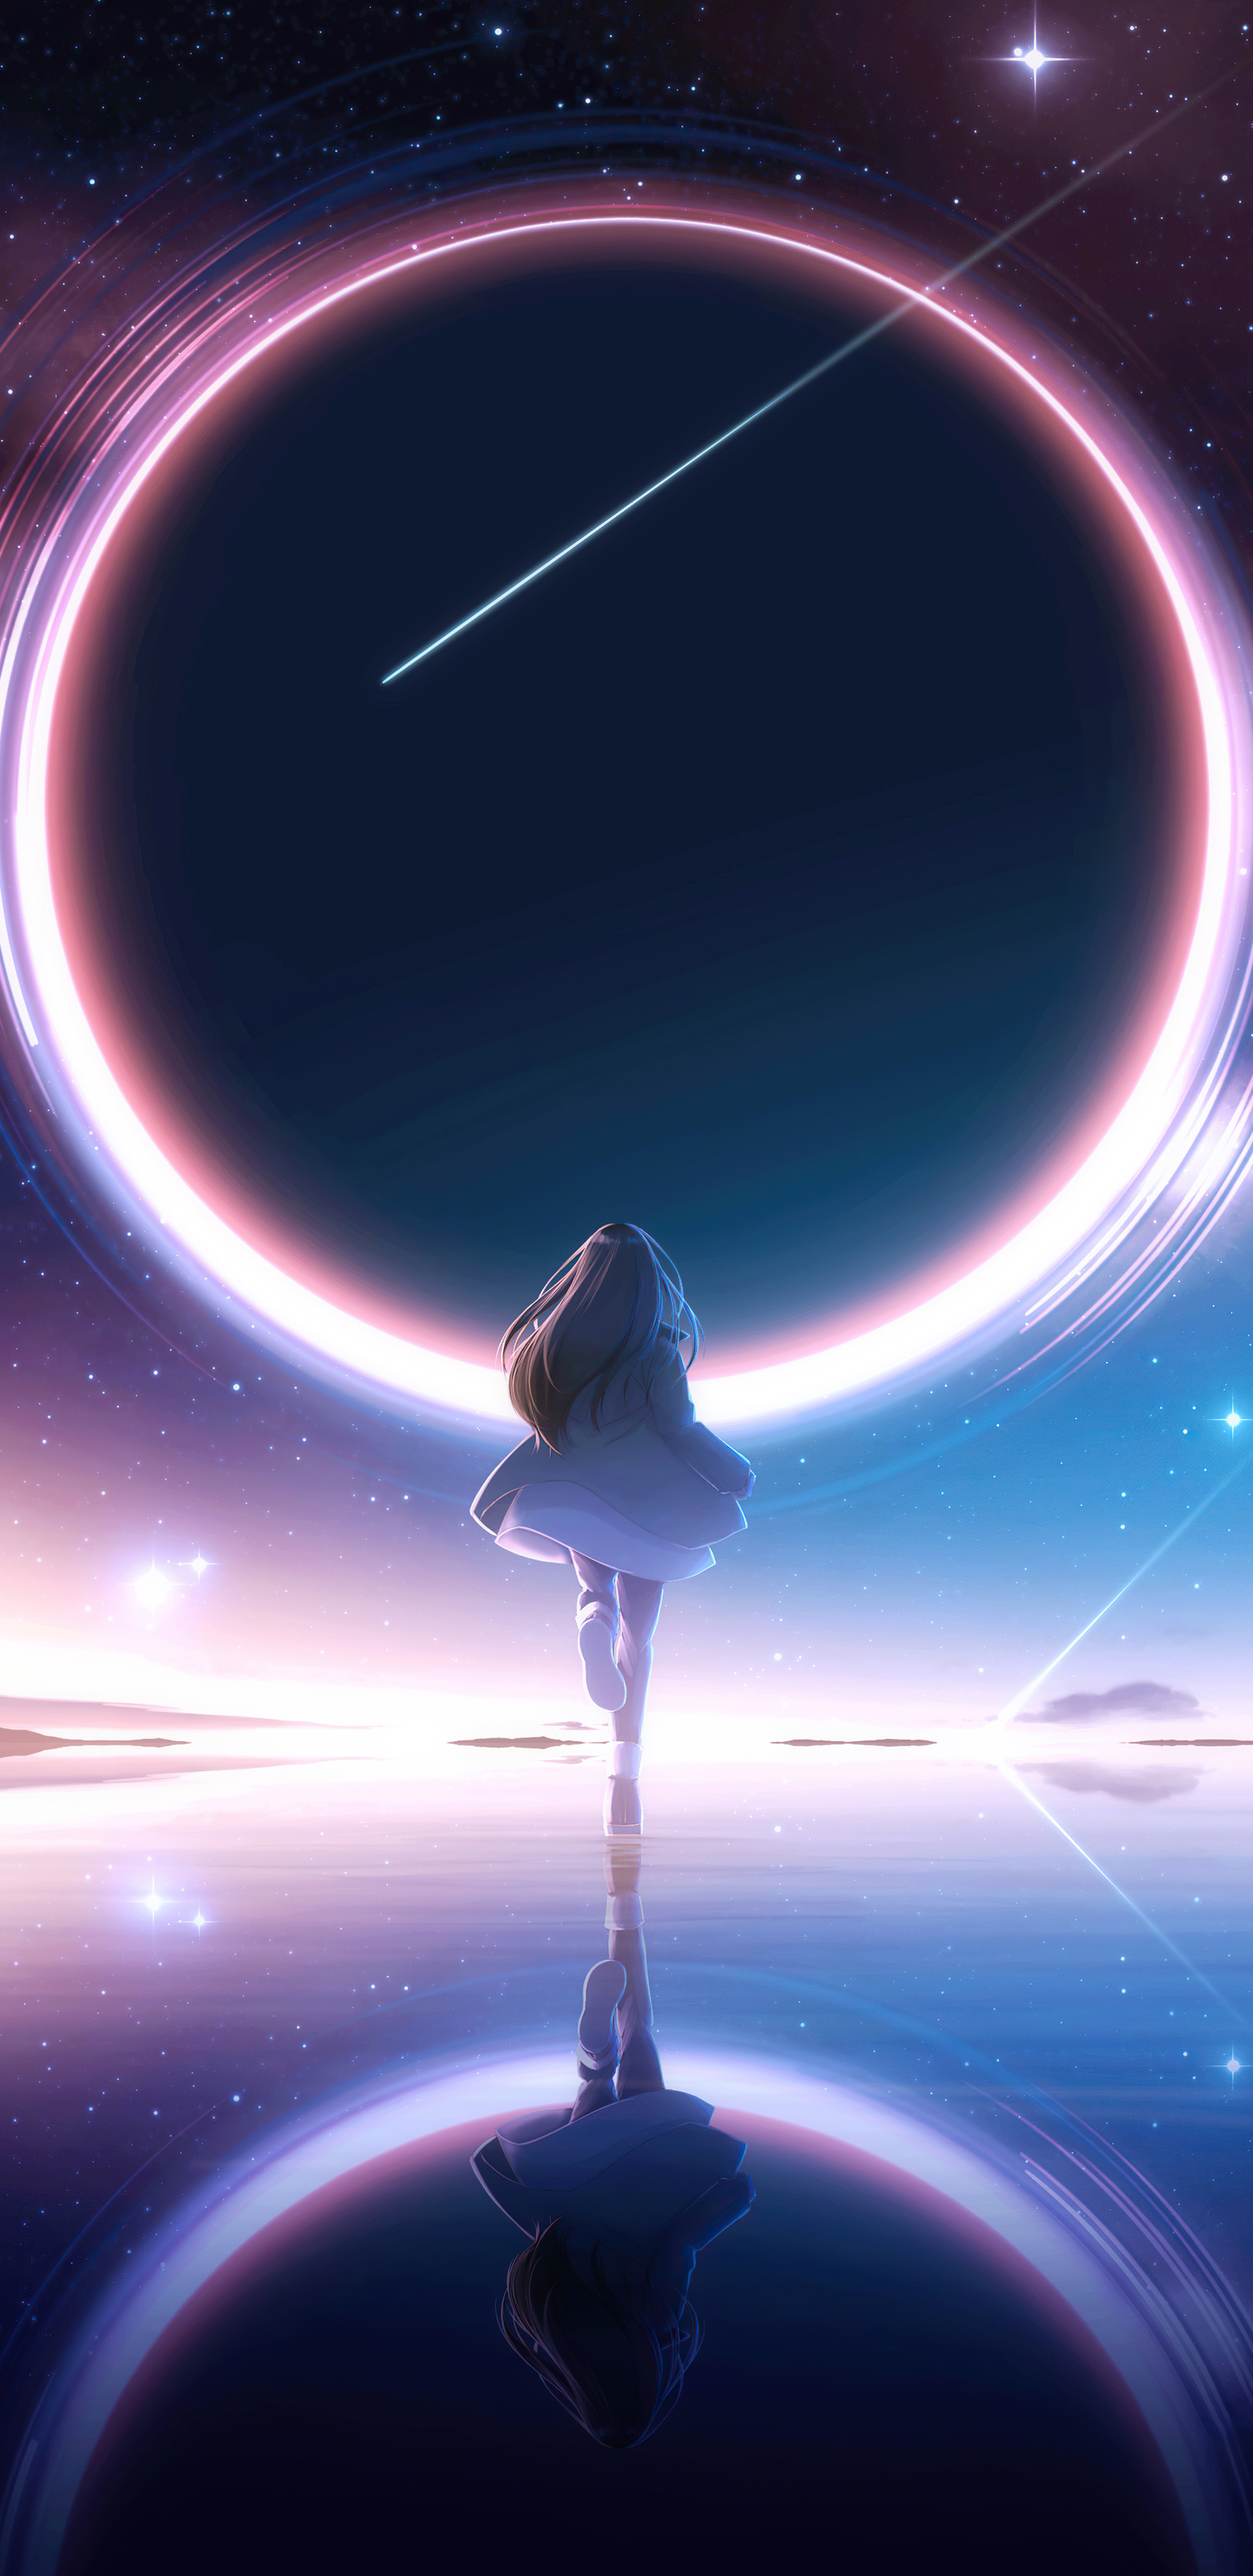 8 Anime Space Wallpapers for iPhone and Android by Jordan Chan